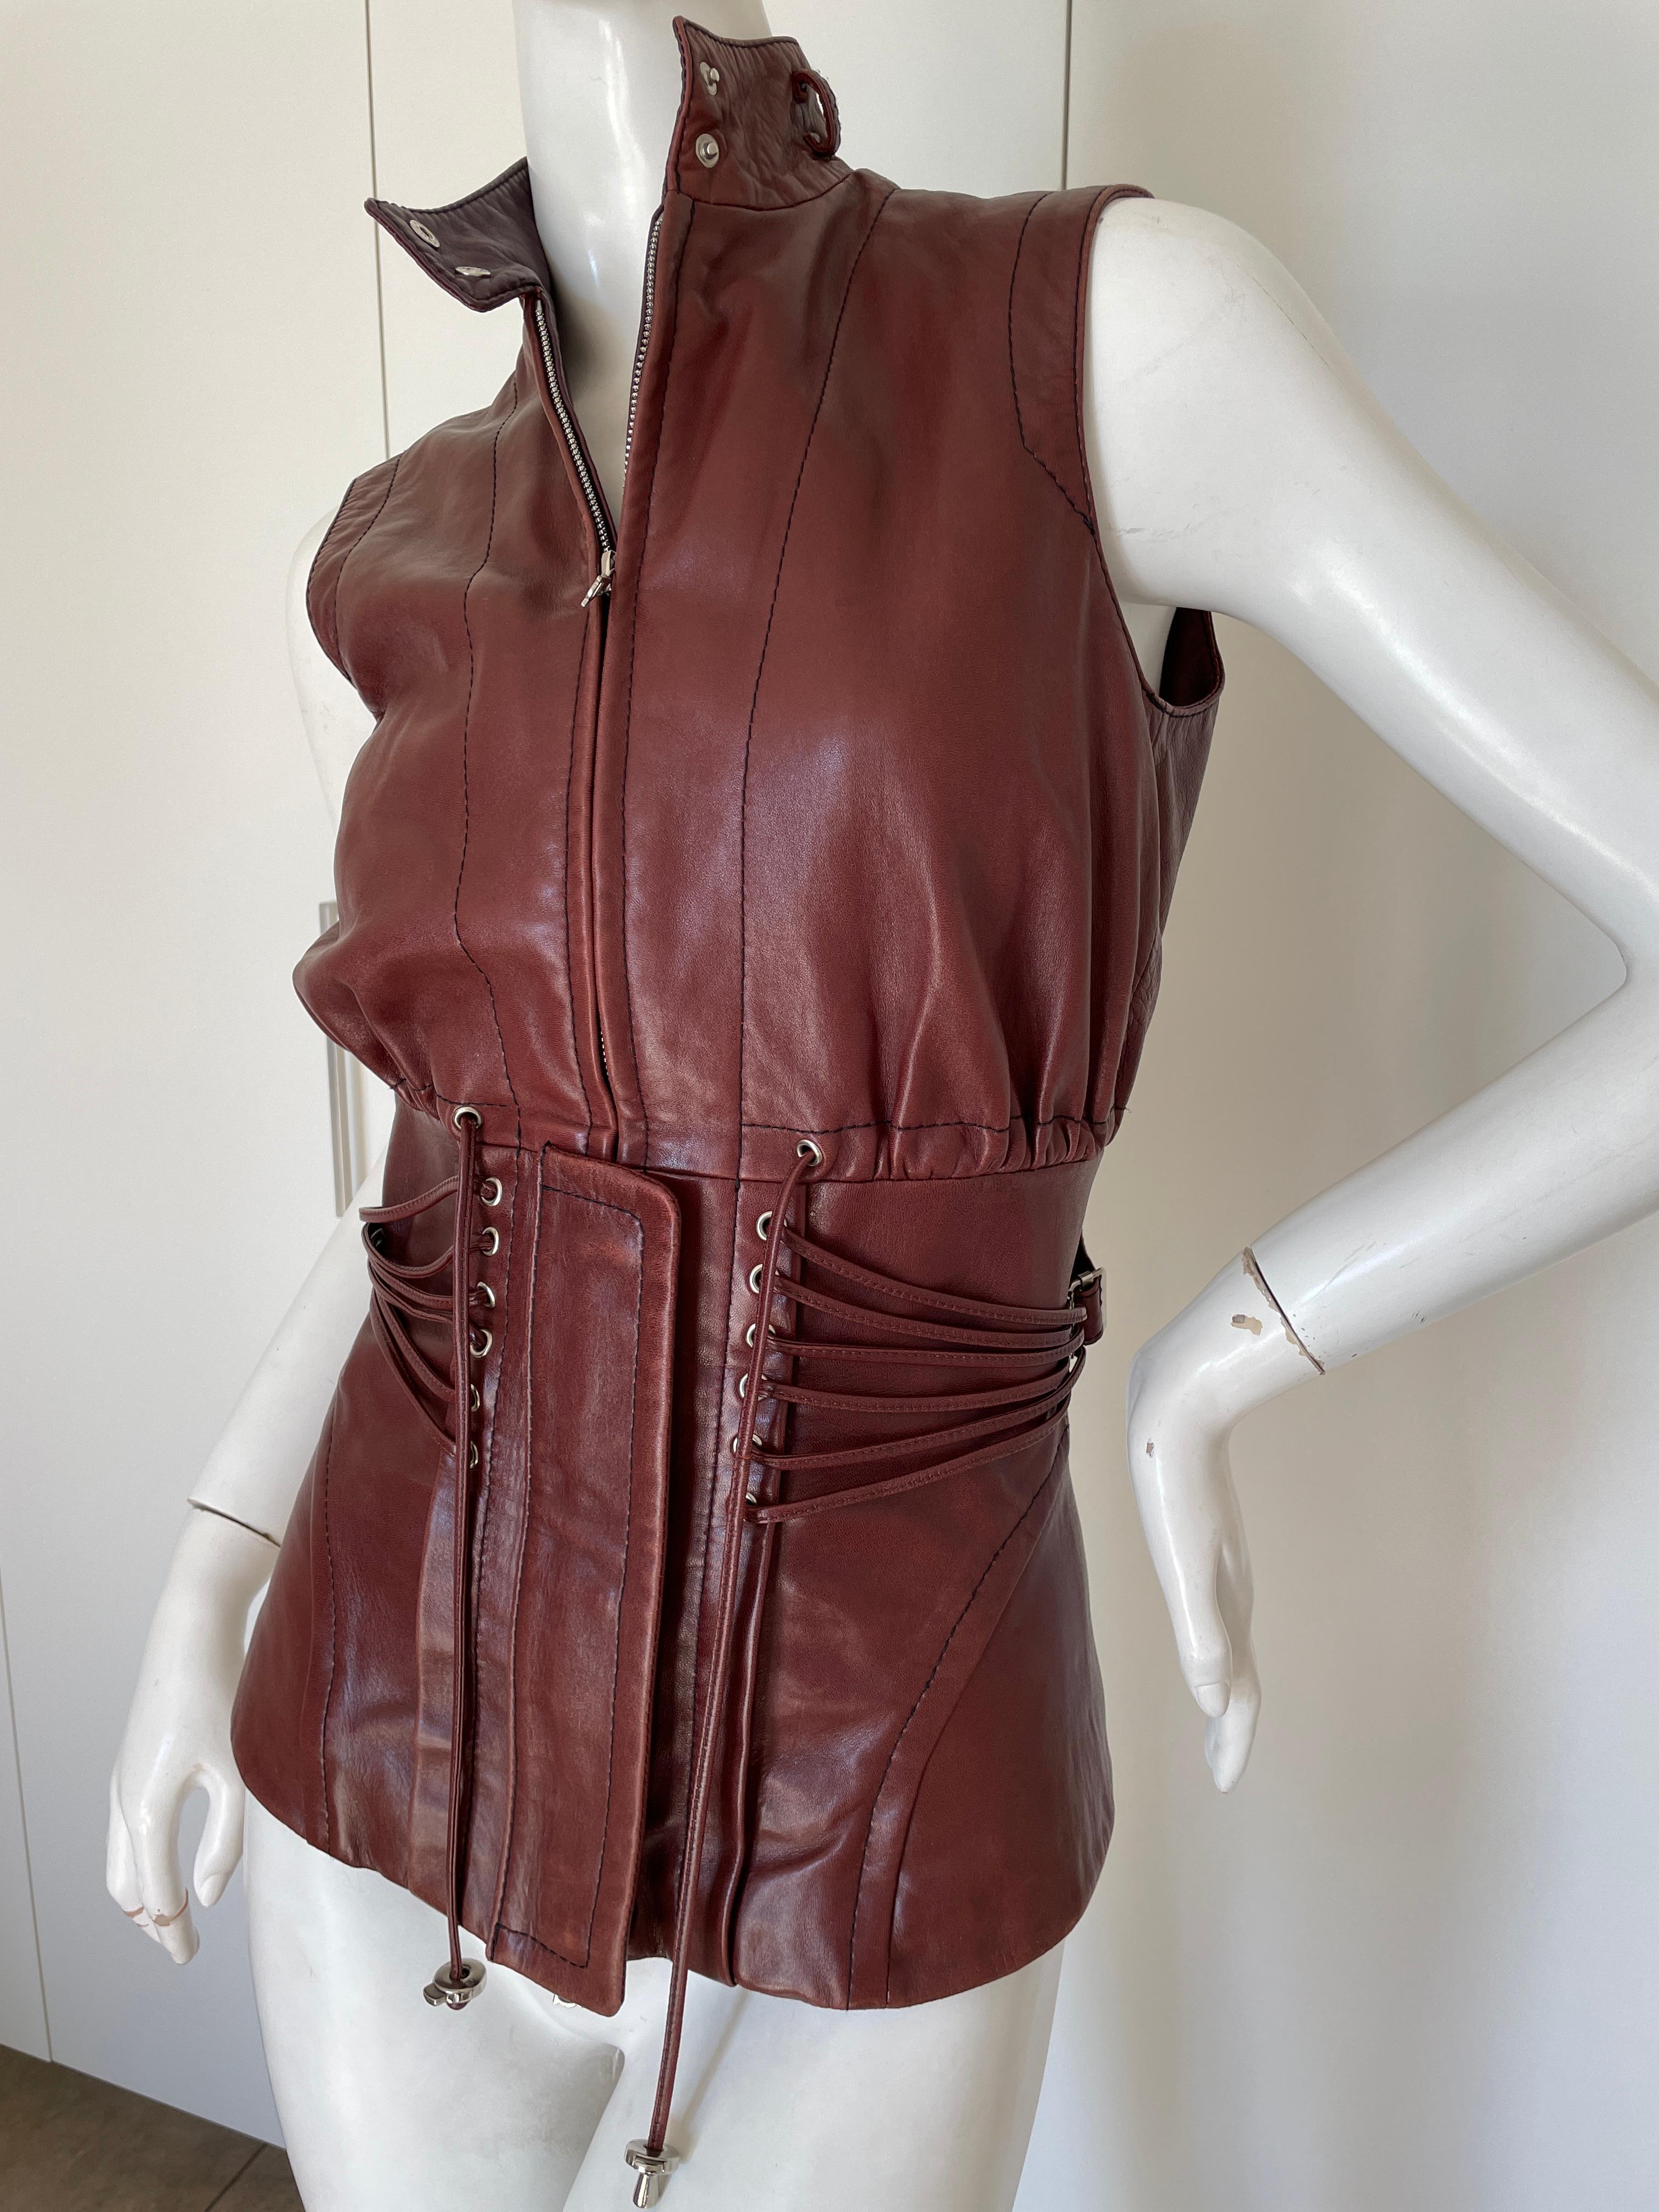 Brown  Gianfranco Ferre Vintage Lambskin Leather Moto Vest with Corset Lacing Details For Sale